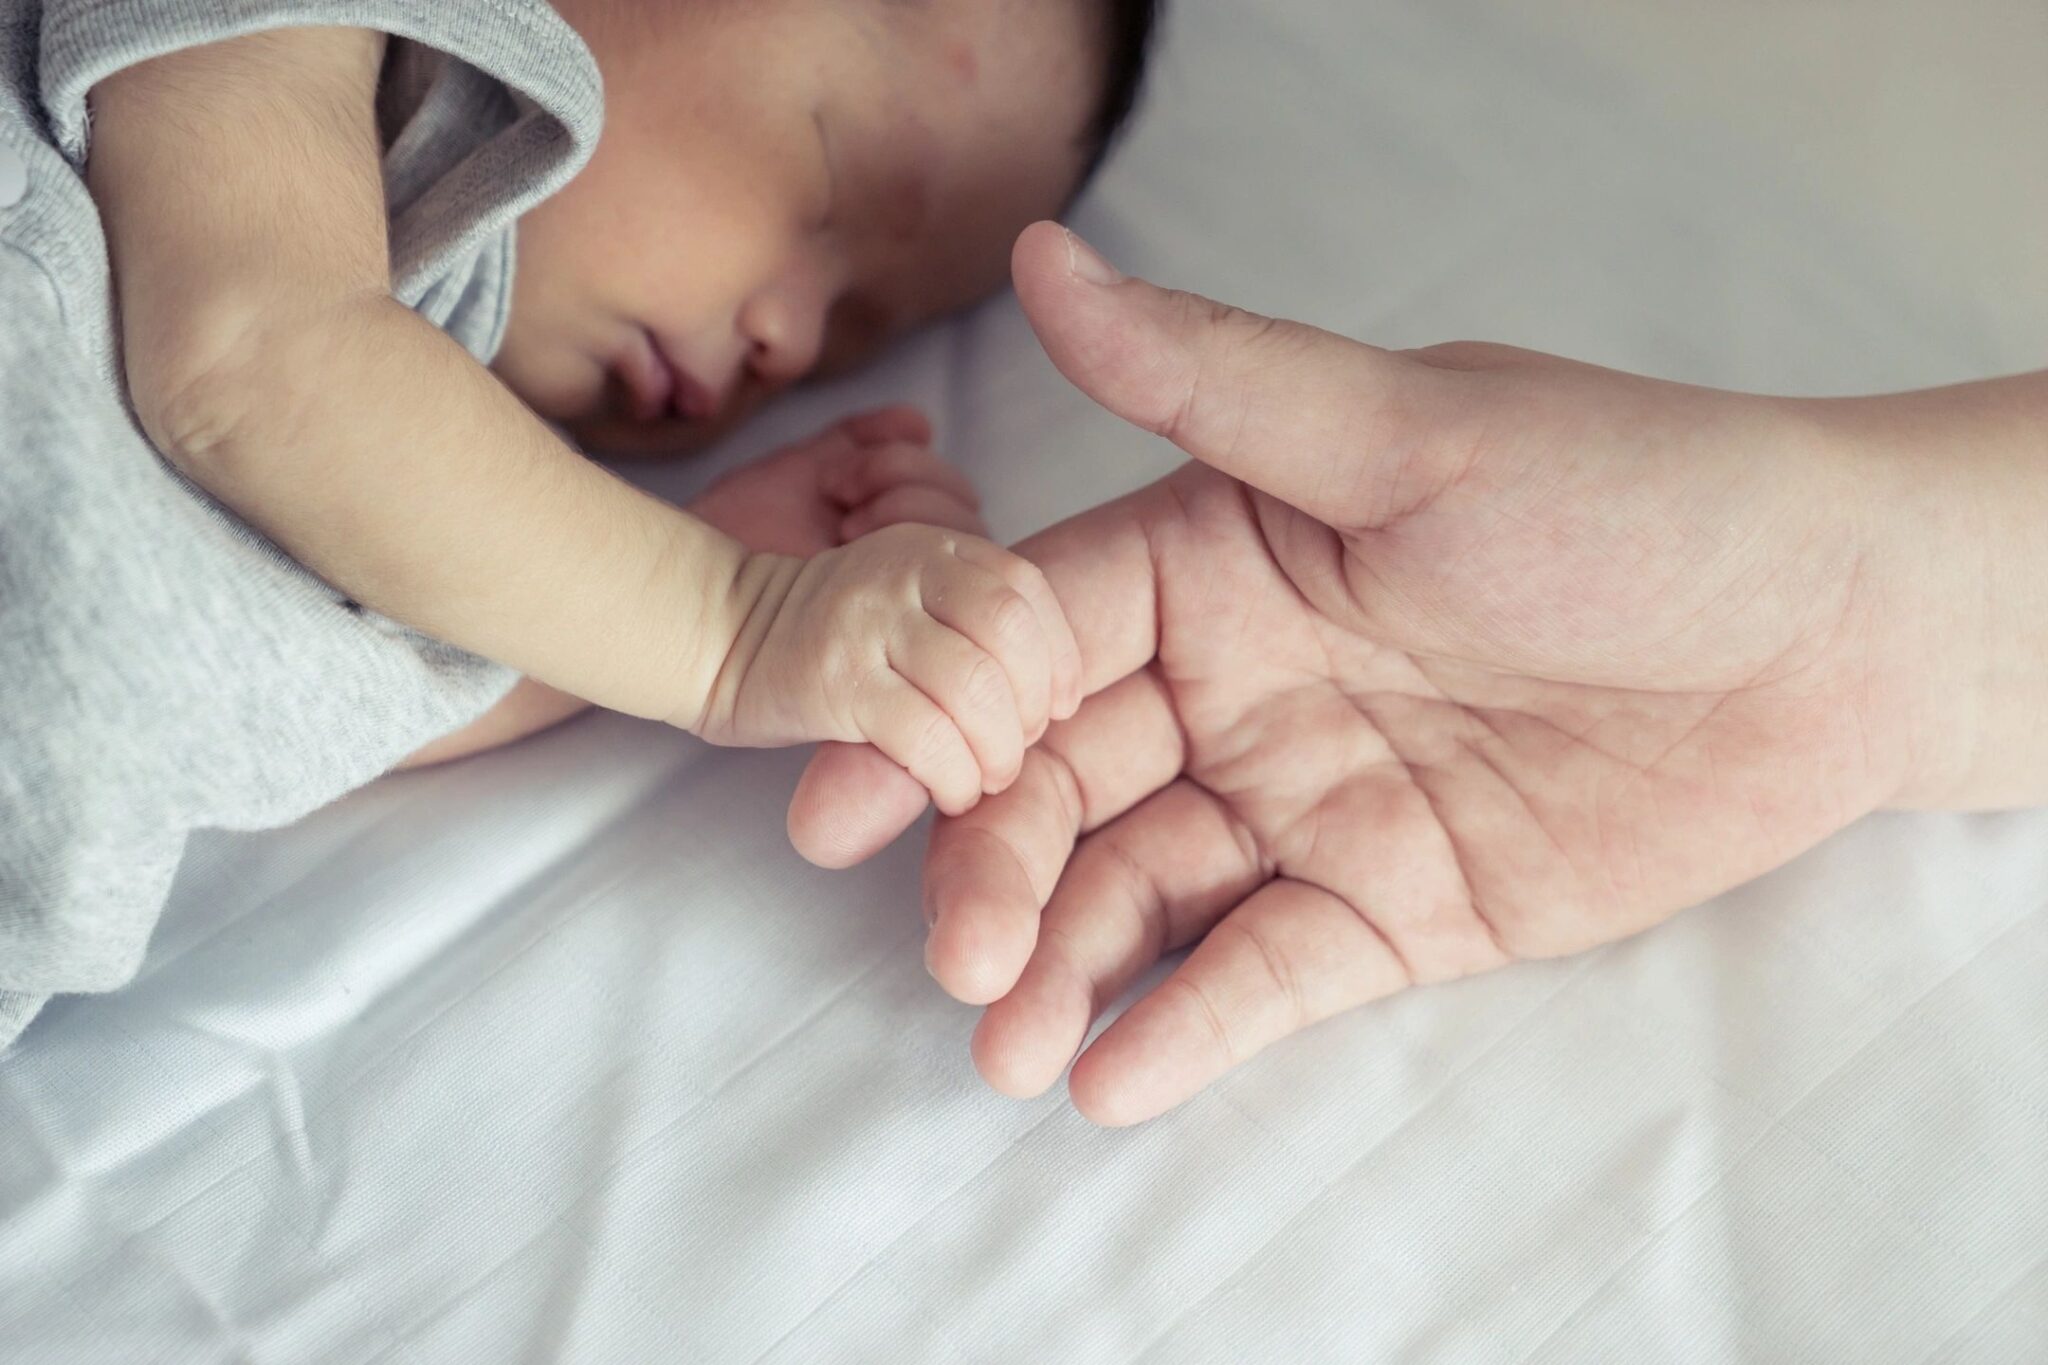 An adult hand reaches out and a newborn baby grasps the adult's index finger